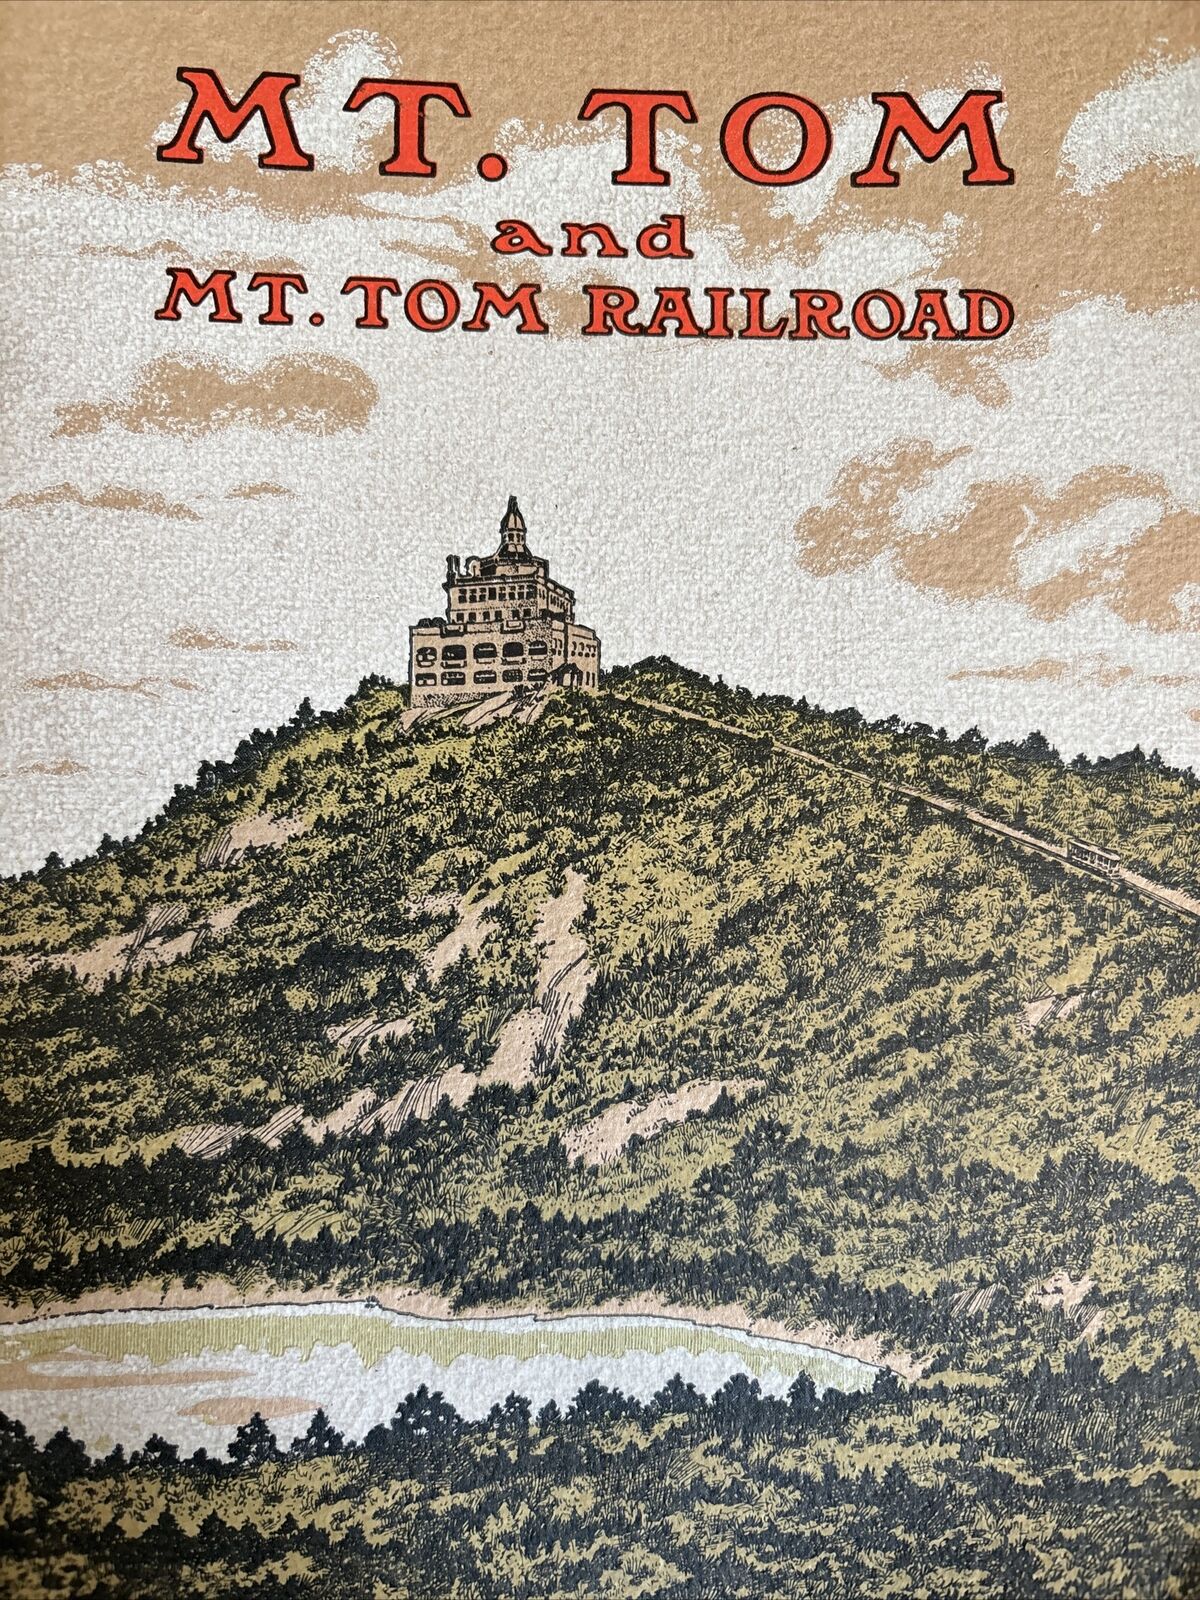 Mt.Tom Railroad Published By Holyoke Street Railway Company Booklet